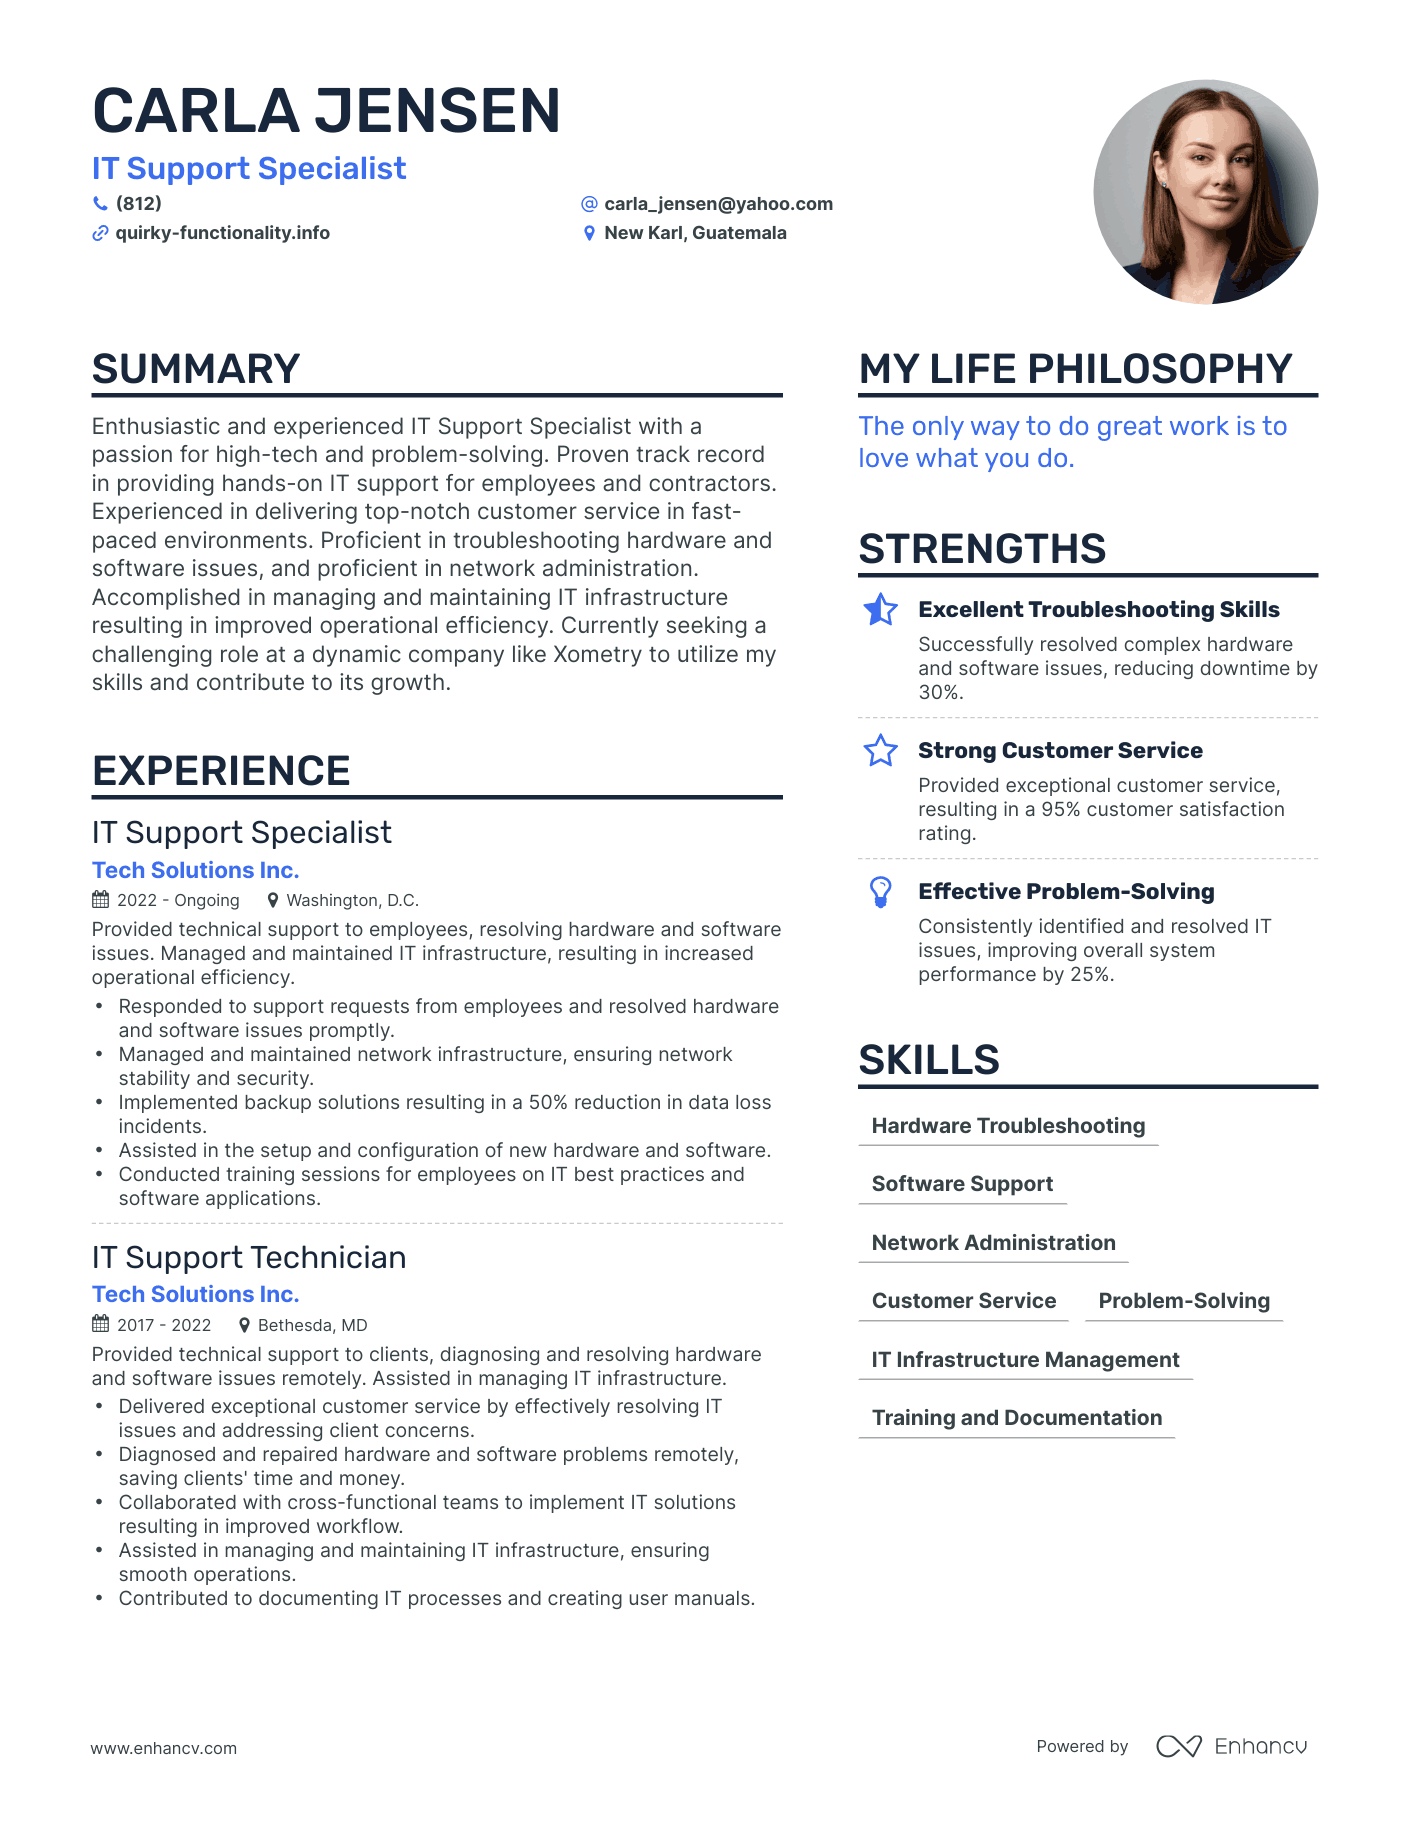 IT Support Specialist resume example